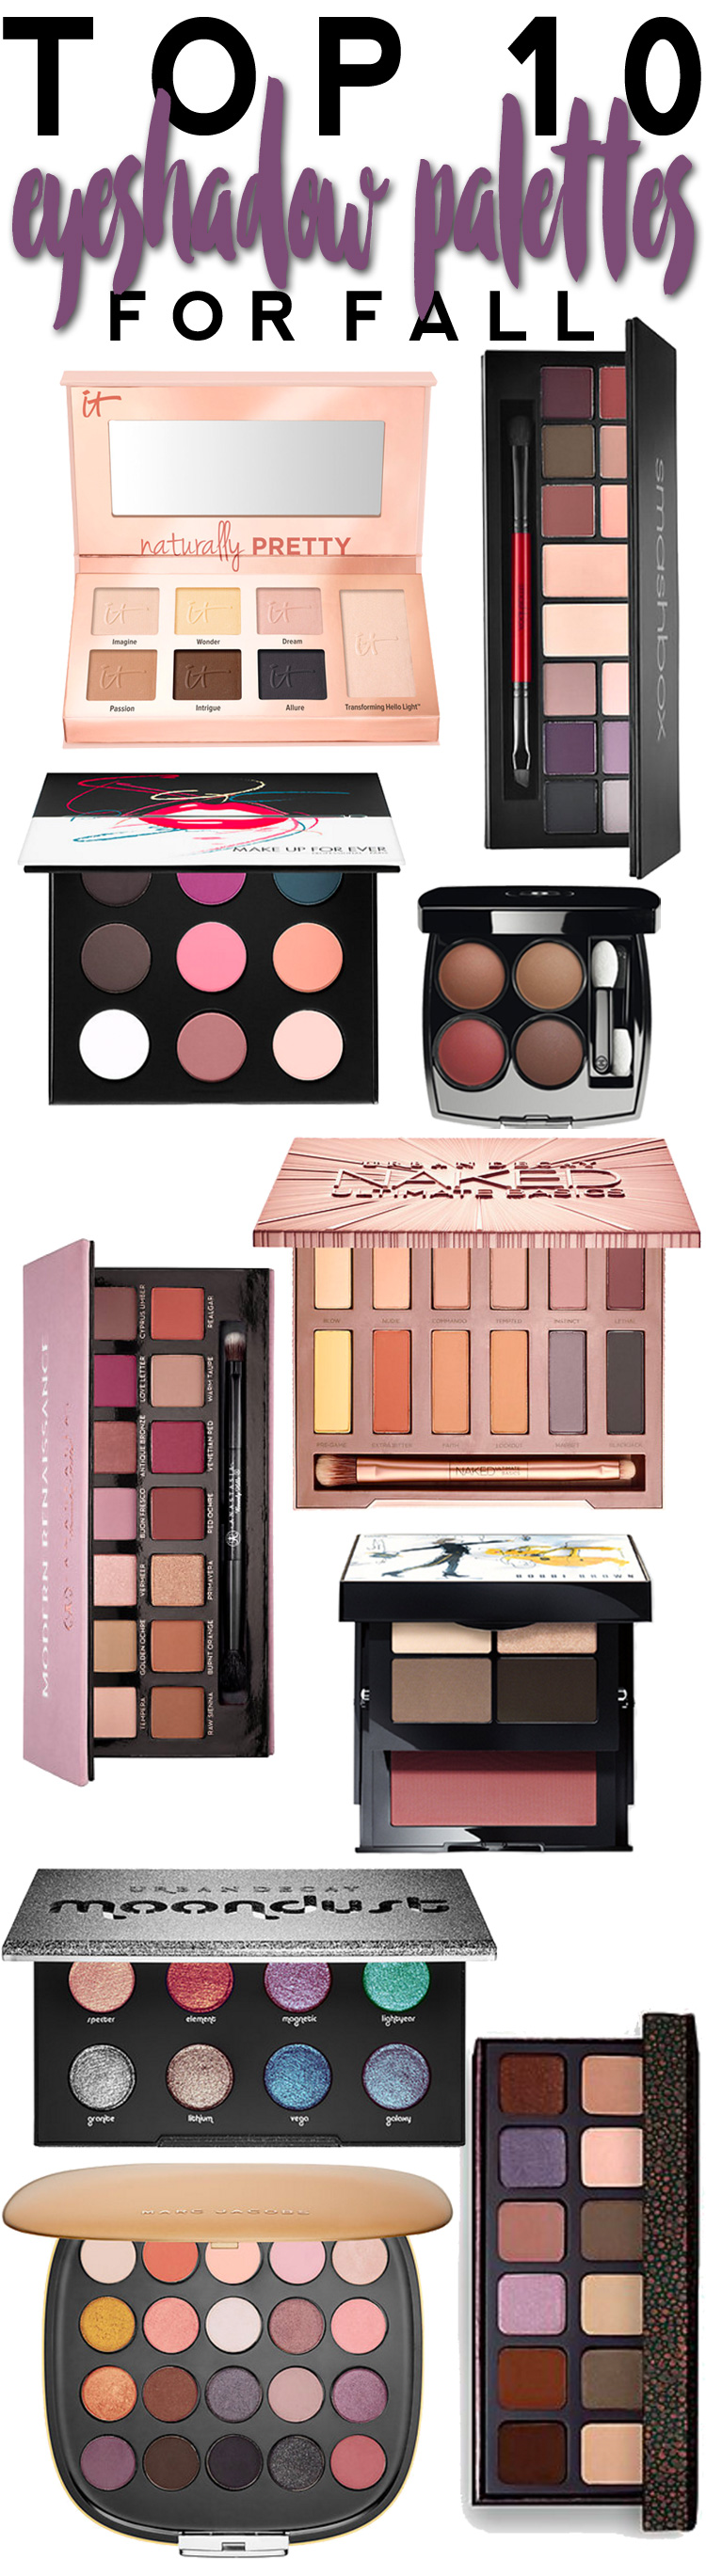 10 Eyeshadow Palettes for Fall. — Beautiful Makeup Search